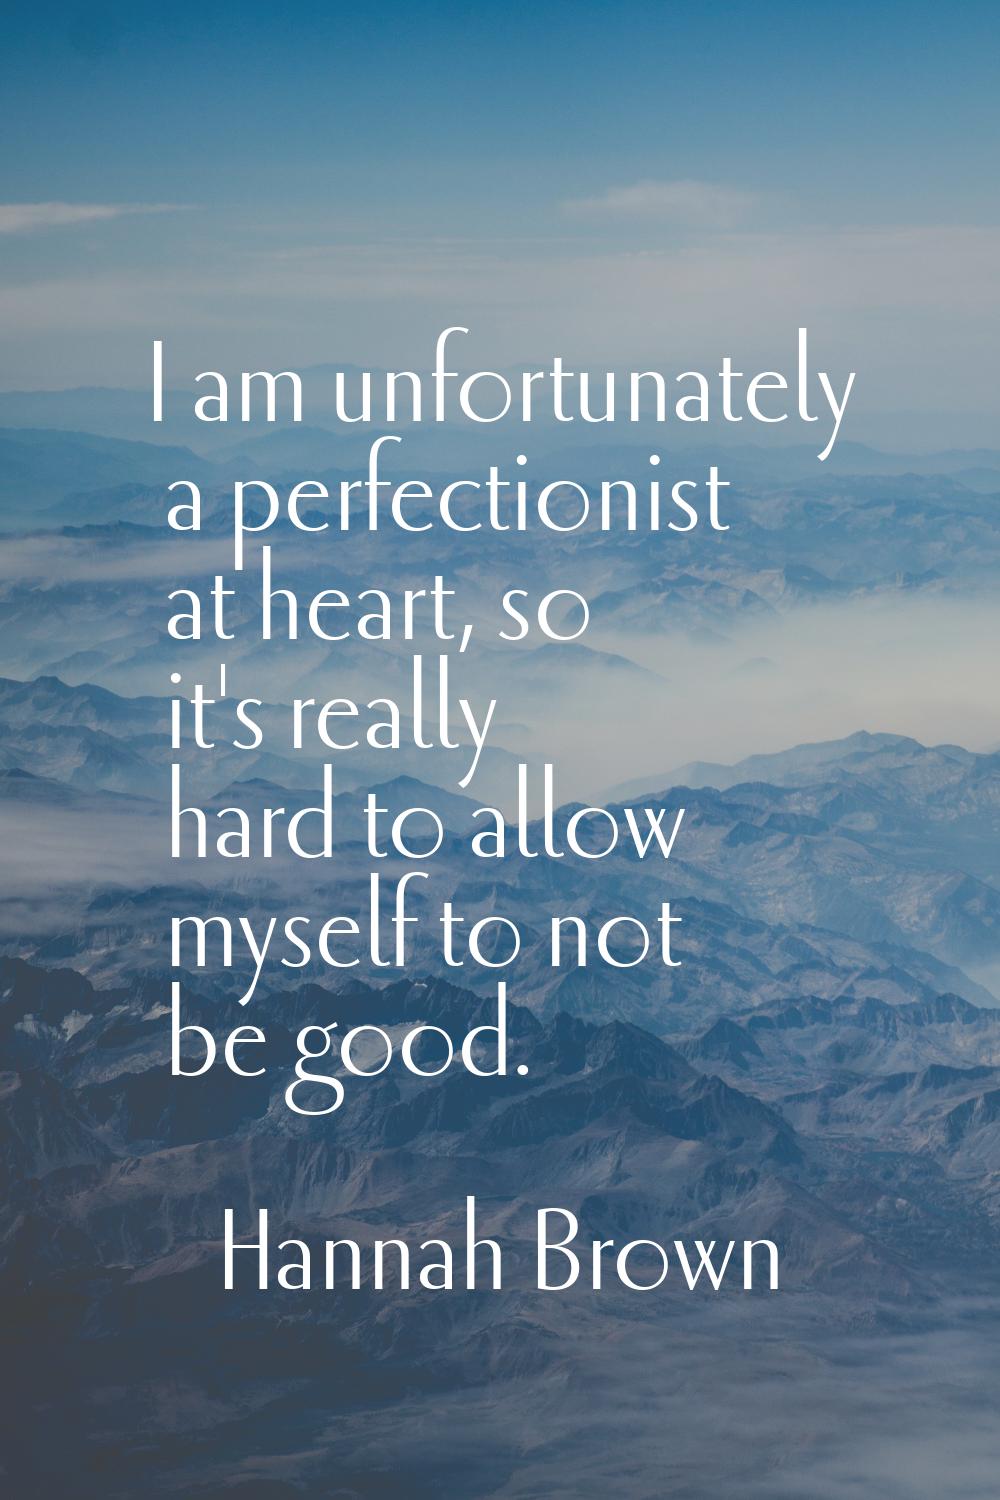 I am unfortunately a perfectionist at heart, so it's really hard to allow myself to not be good.